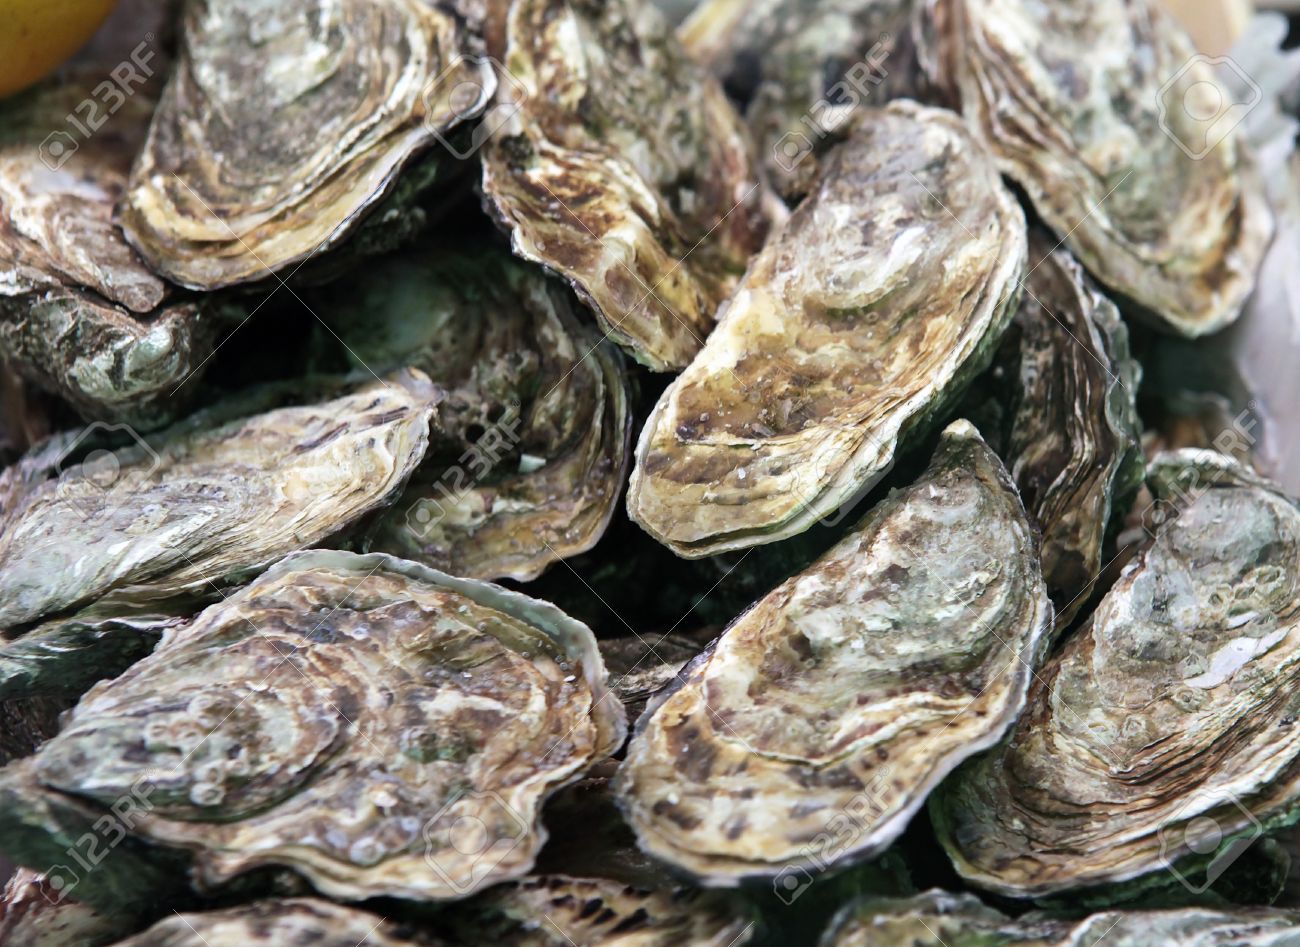 As PEI Oyster Industry Expands, Public Meetings Stir Interest, Concerns